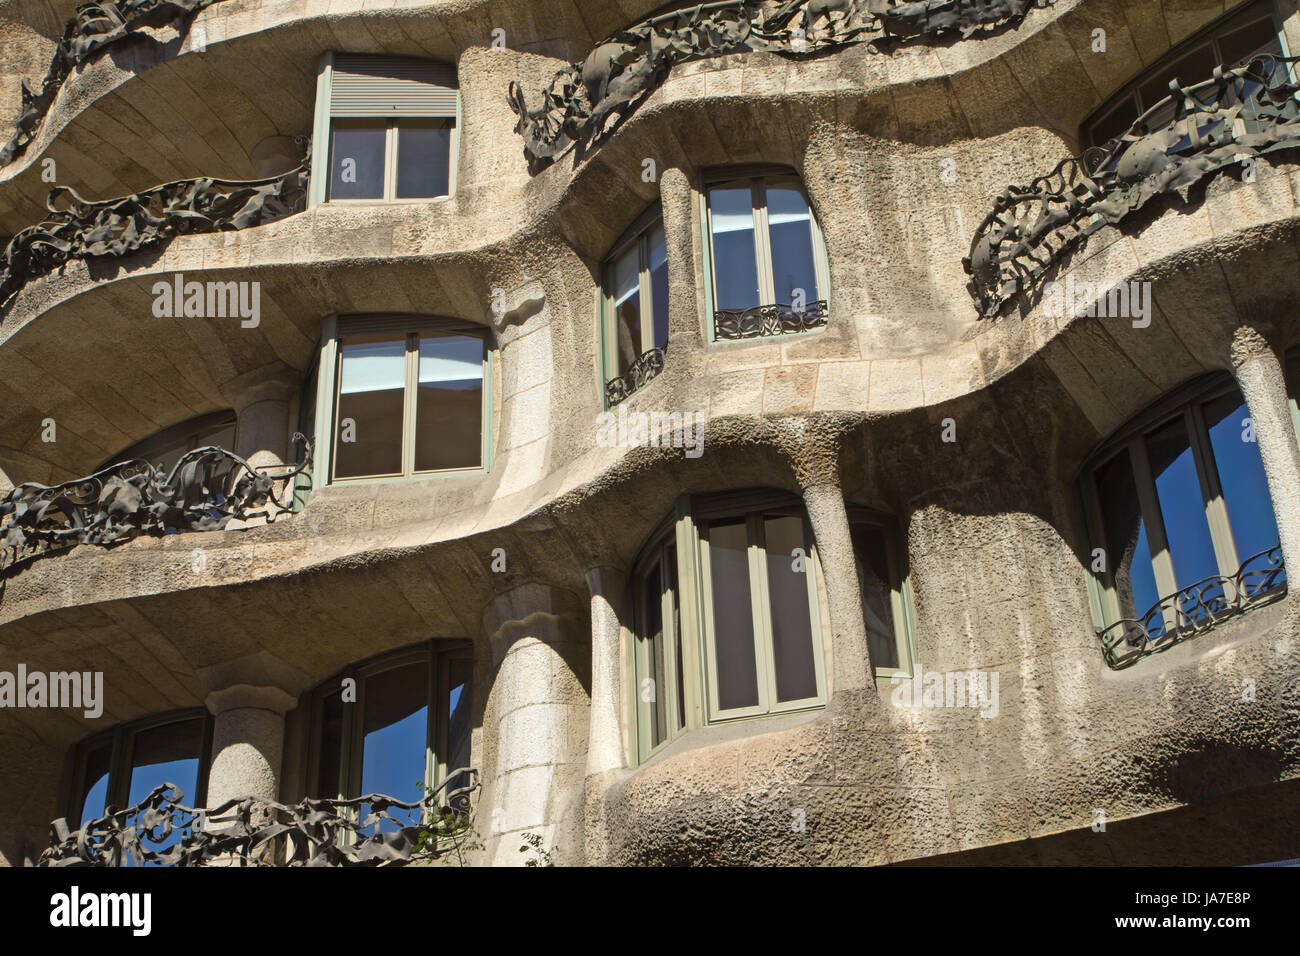 BARCELONA. APR 24: Casa Mila is a building that is one of symbols of Barcelona. Iz was built during the years 1906–1912 April 24, 2013 in Barcelona, Spain. Stock Photo